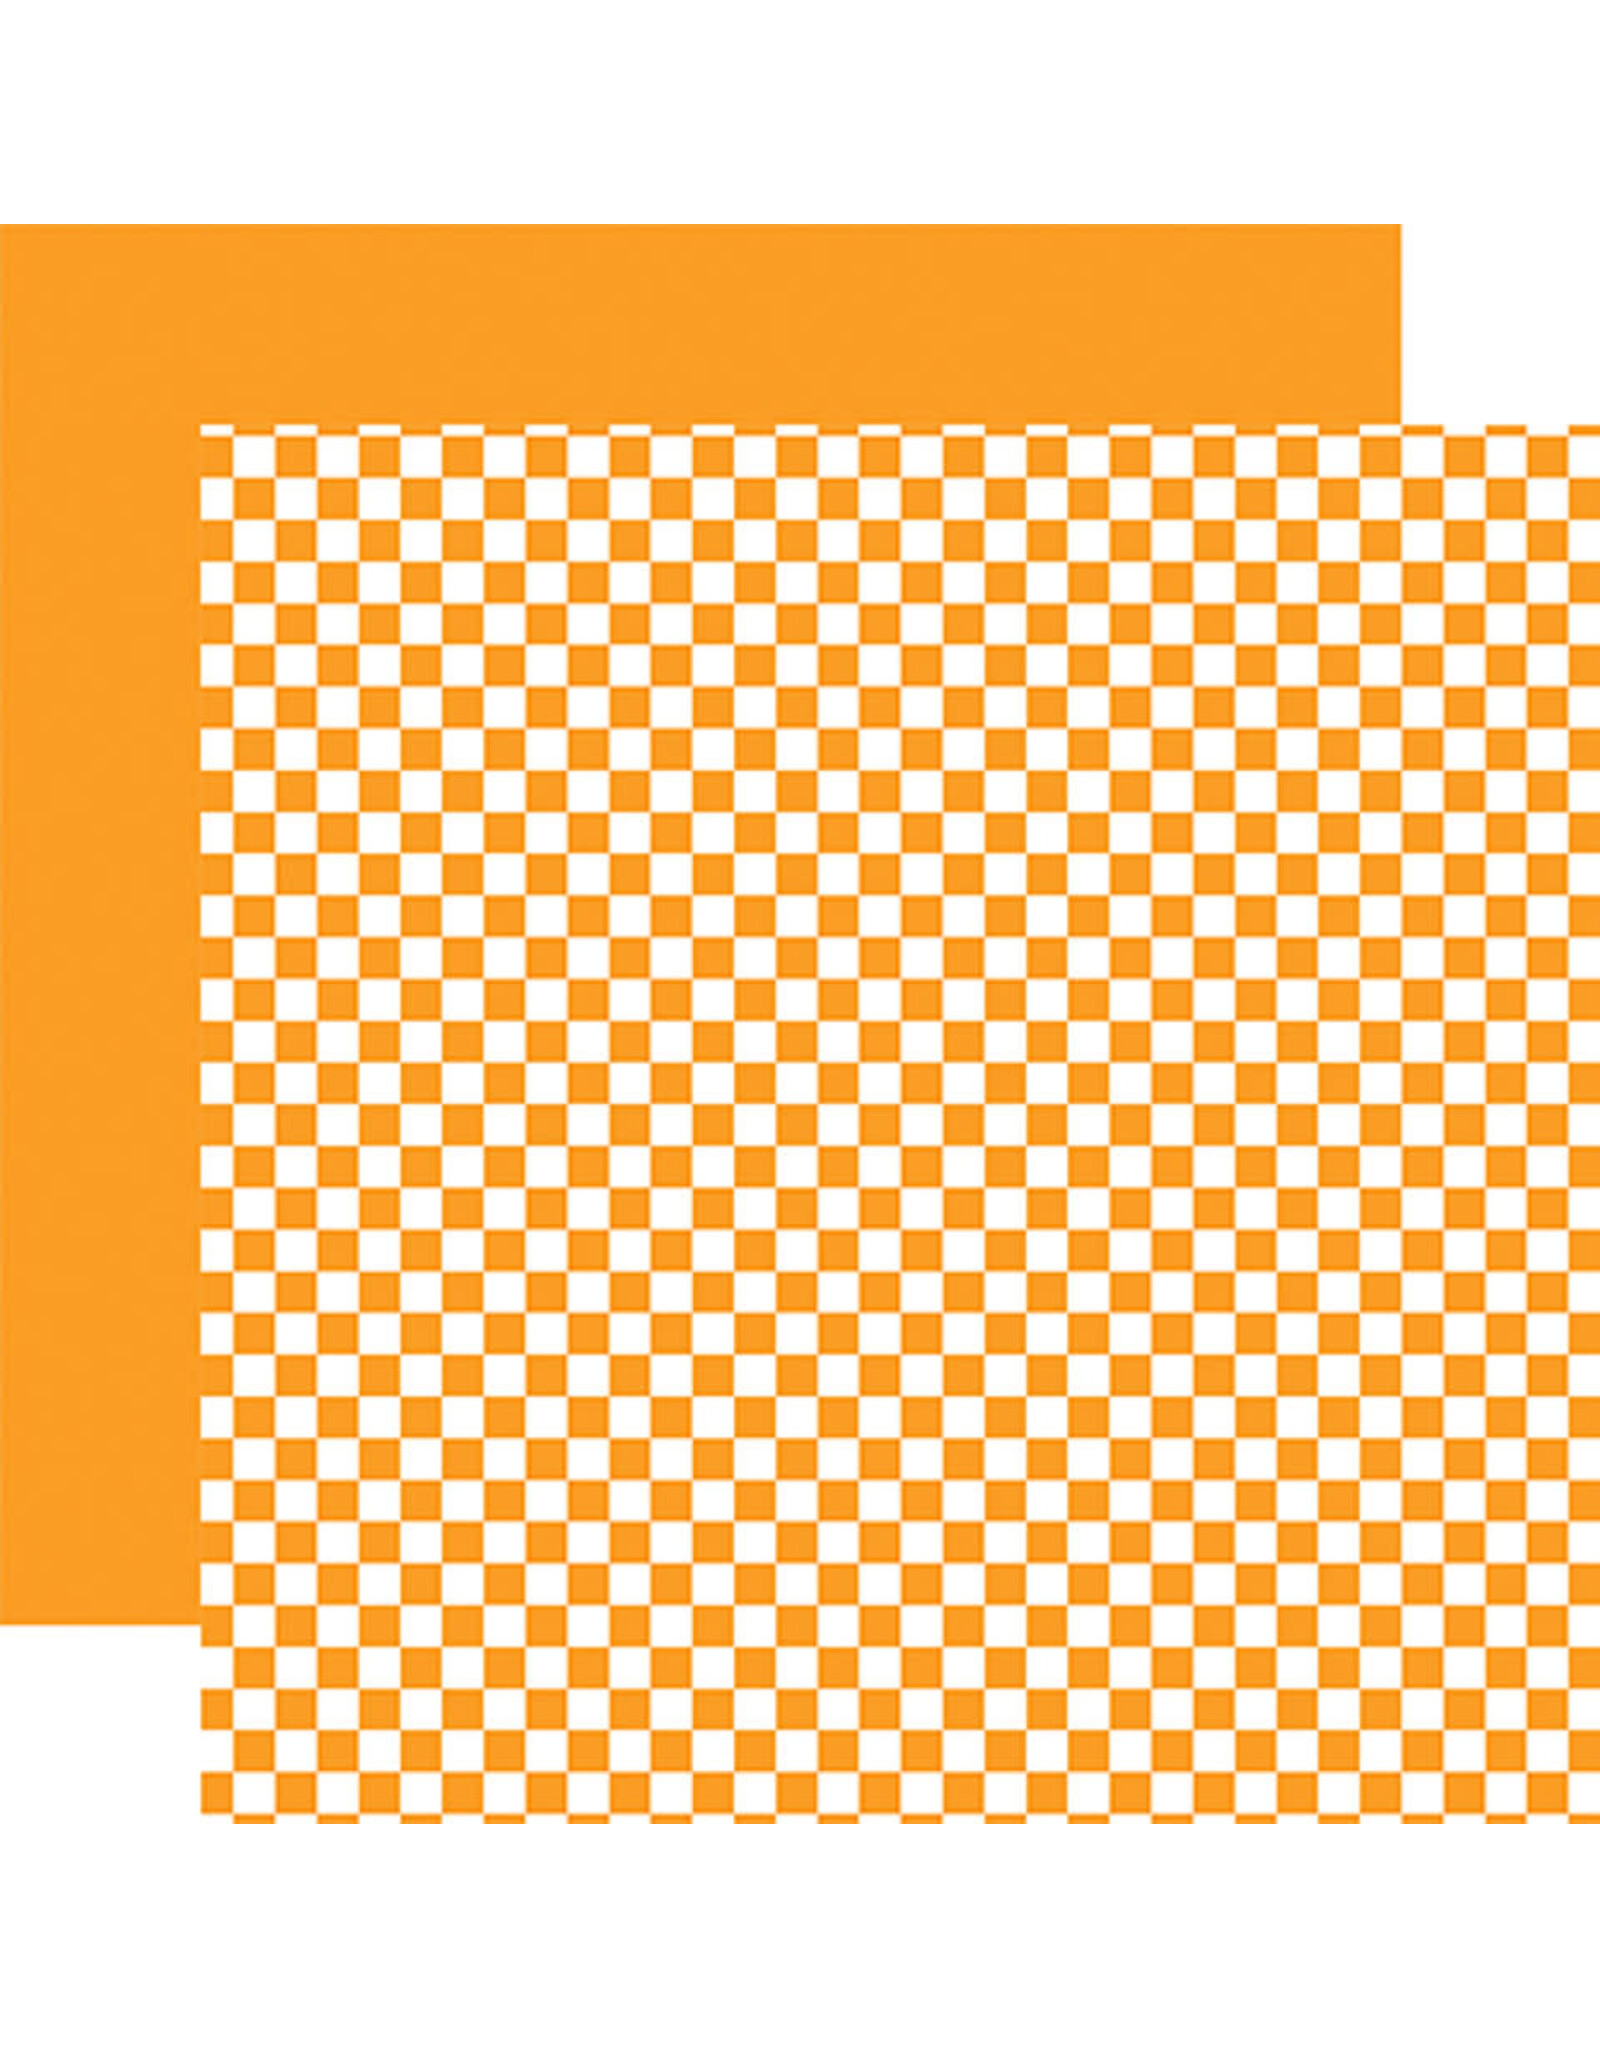 Echo Park Checkerboard: Tangerine 12x12 Patterned Paper